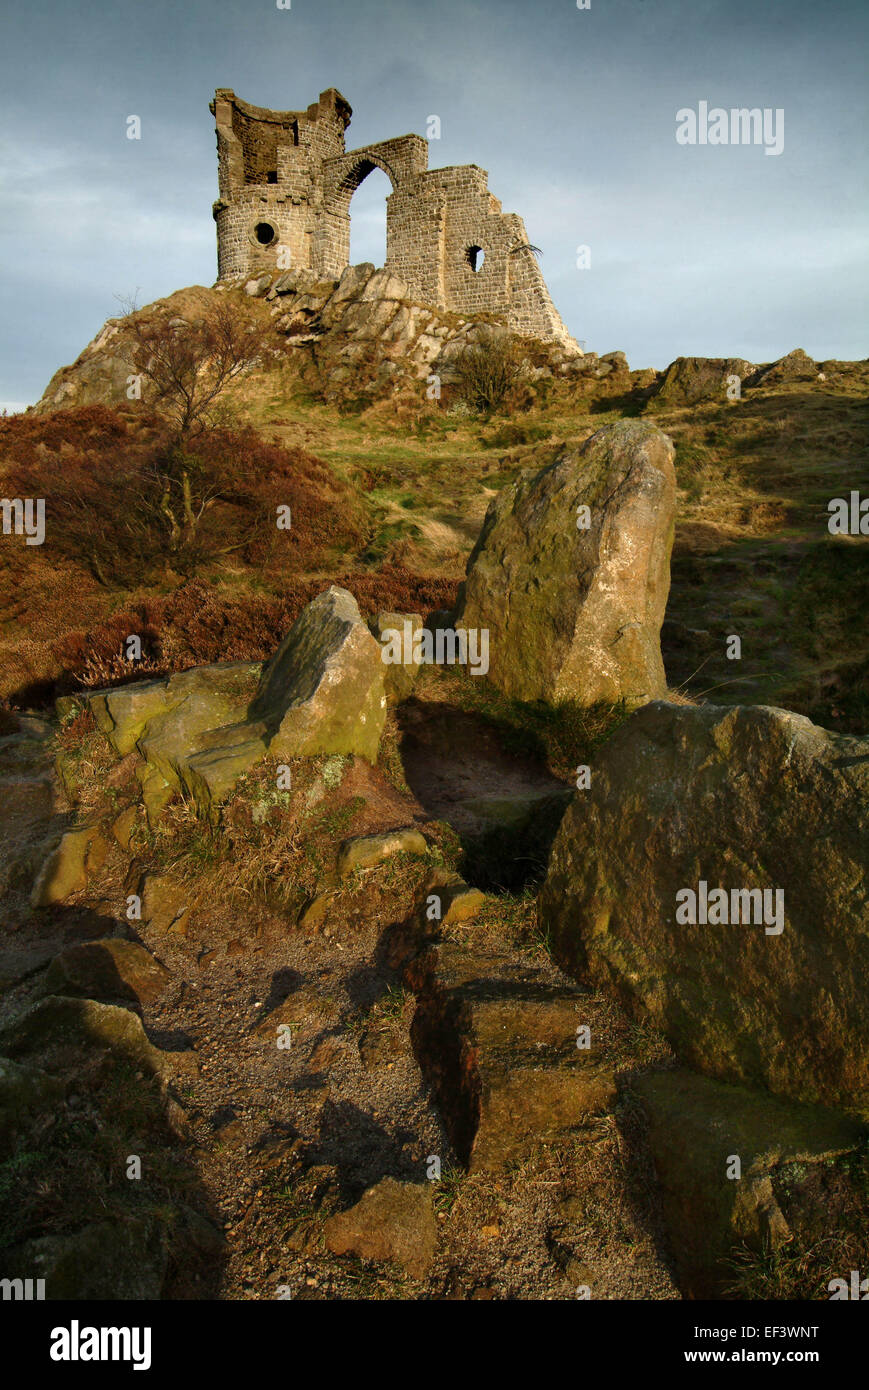 Mow Cop Castle in the village of Mow Cop, Staffordshire Stock Photo - Alamy